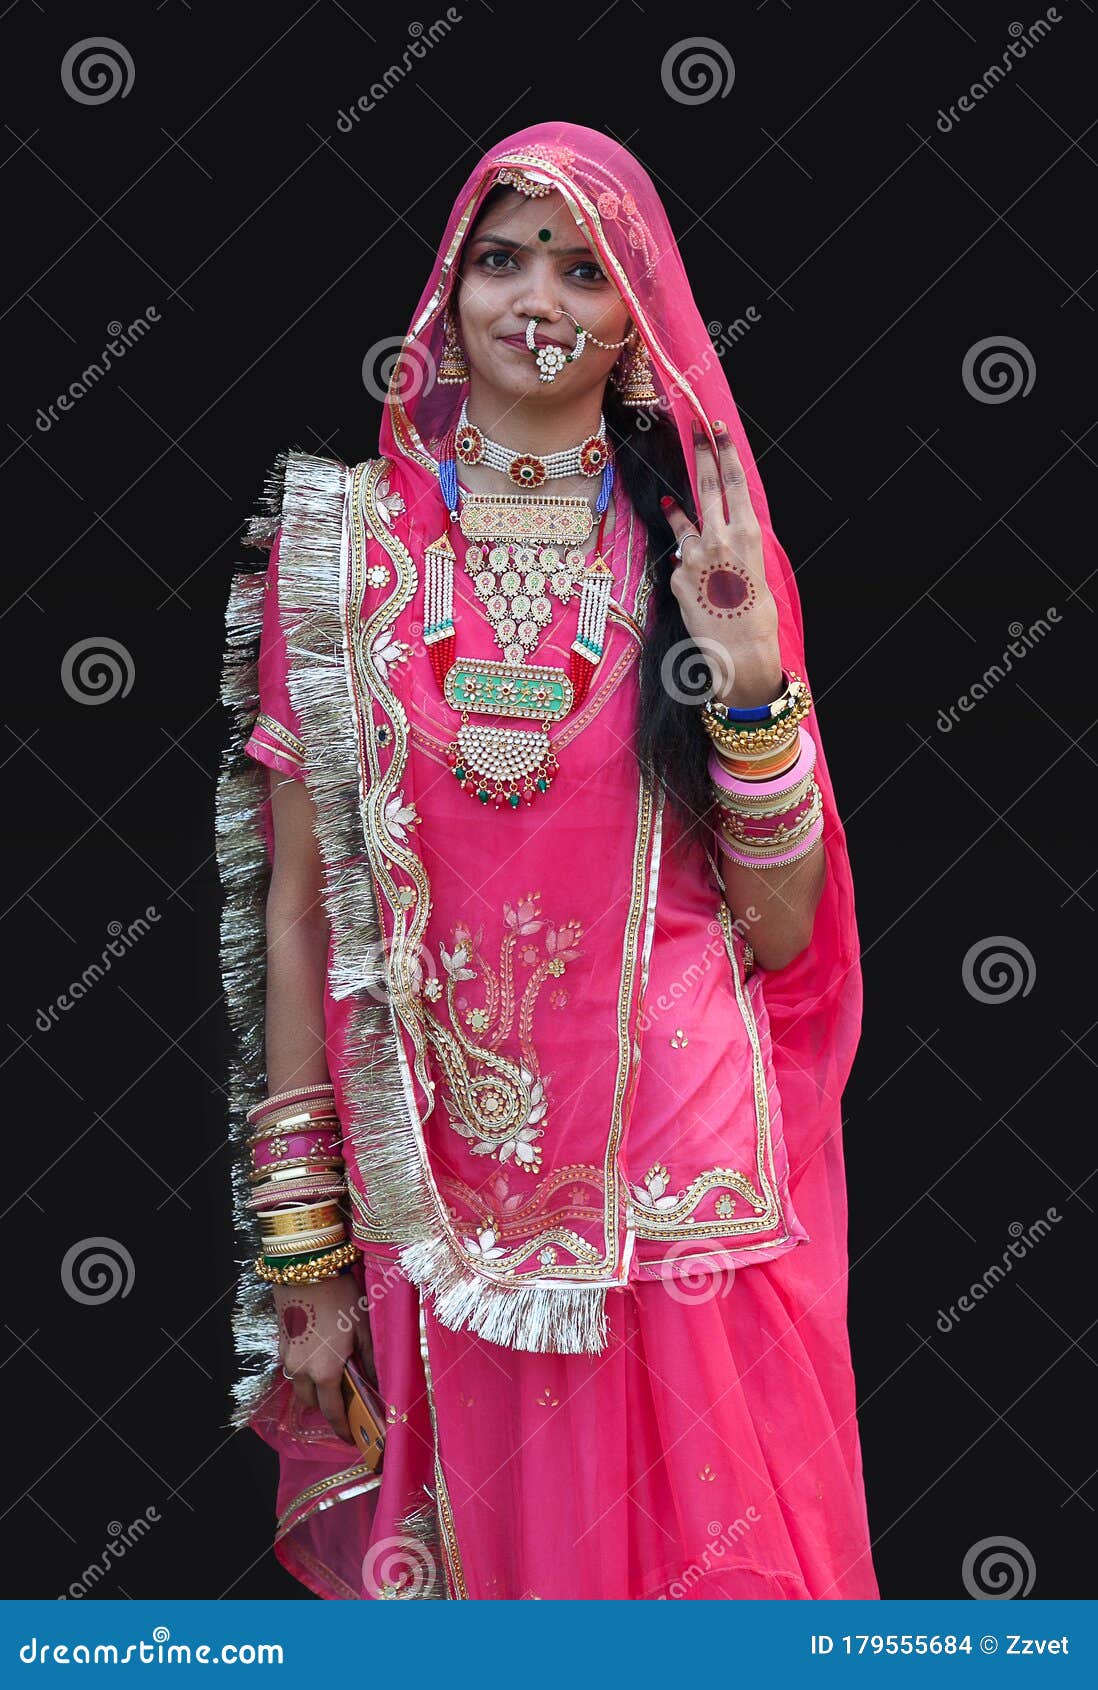 July 30, 2022, Srinagar, India: A girl dressed in a traditional Kashmiri dress  poses for a